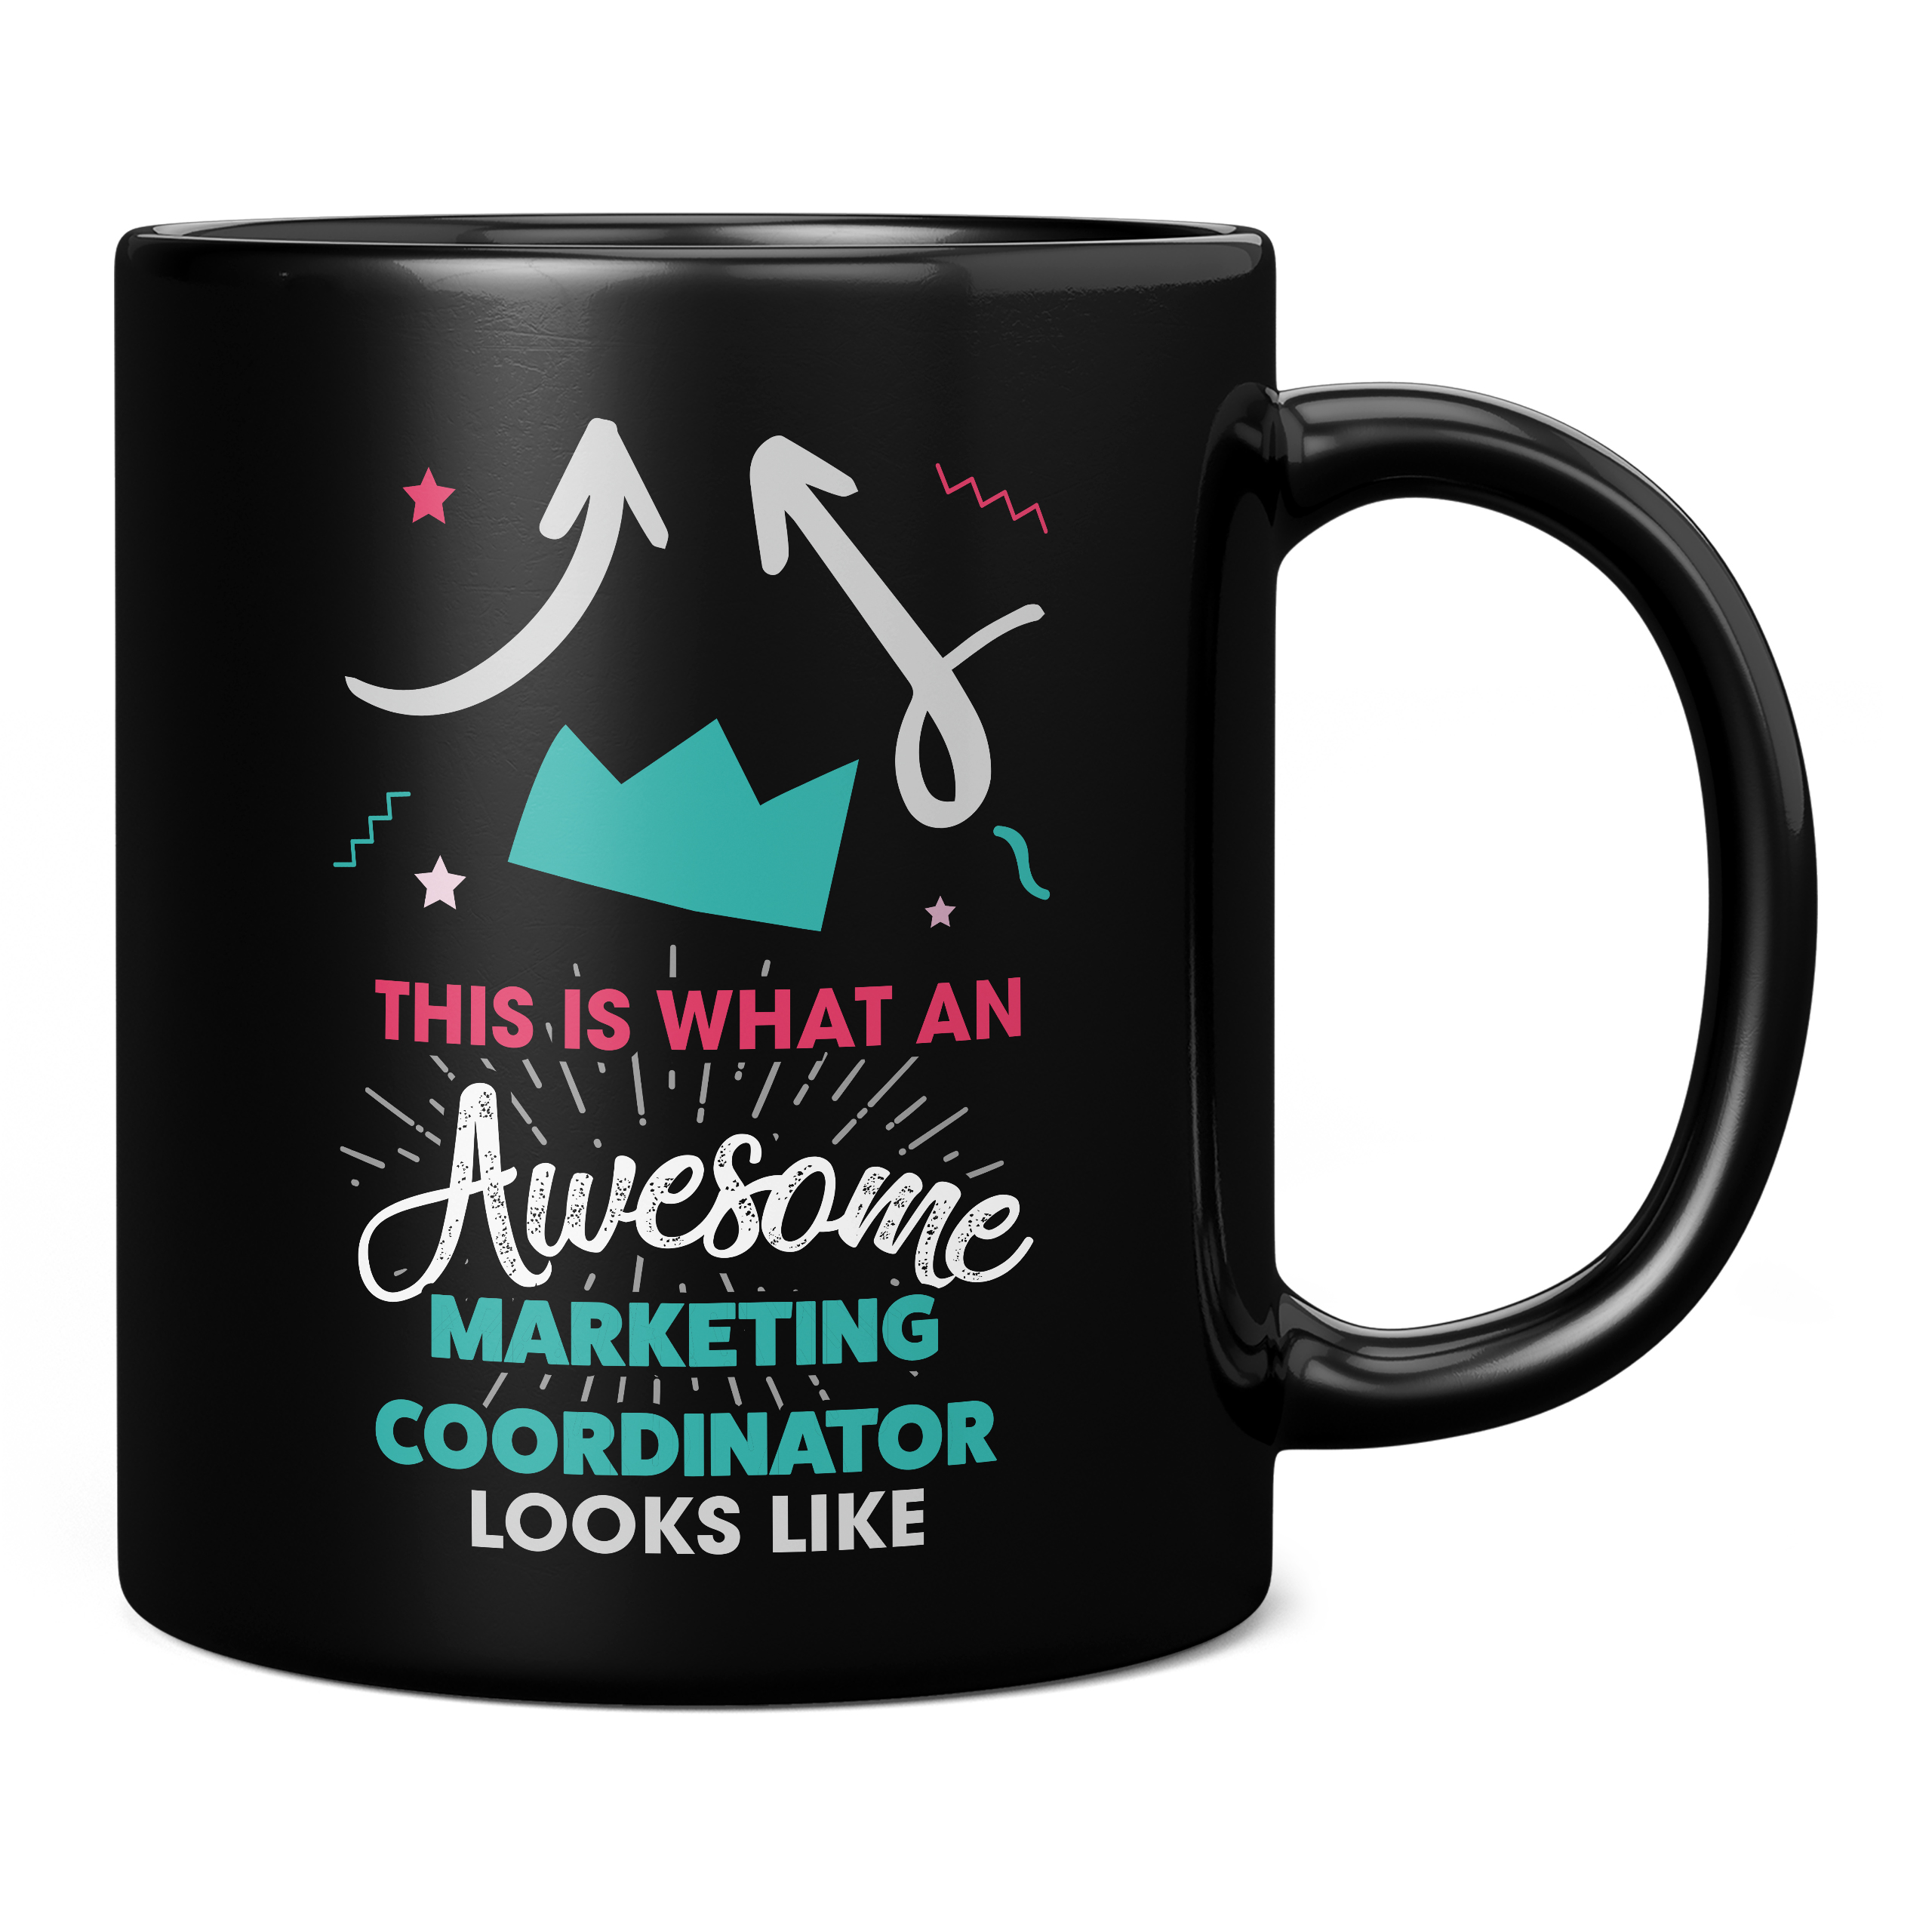 THIS IS WHAT AN AWESOME MARKETING COORDINATOR LOOKS LIKE 11OZ NOVELTY MUG